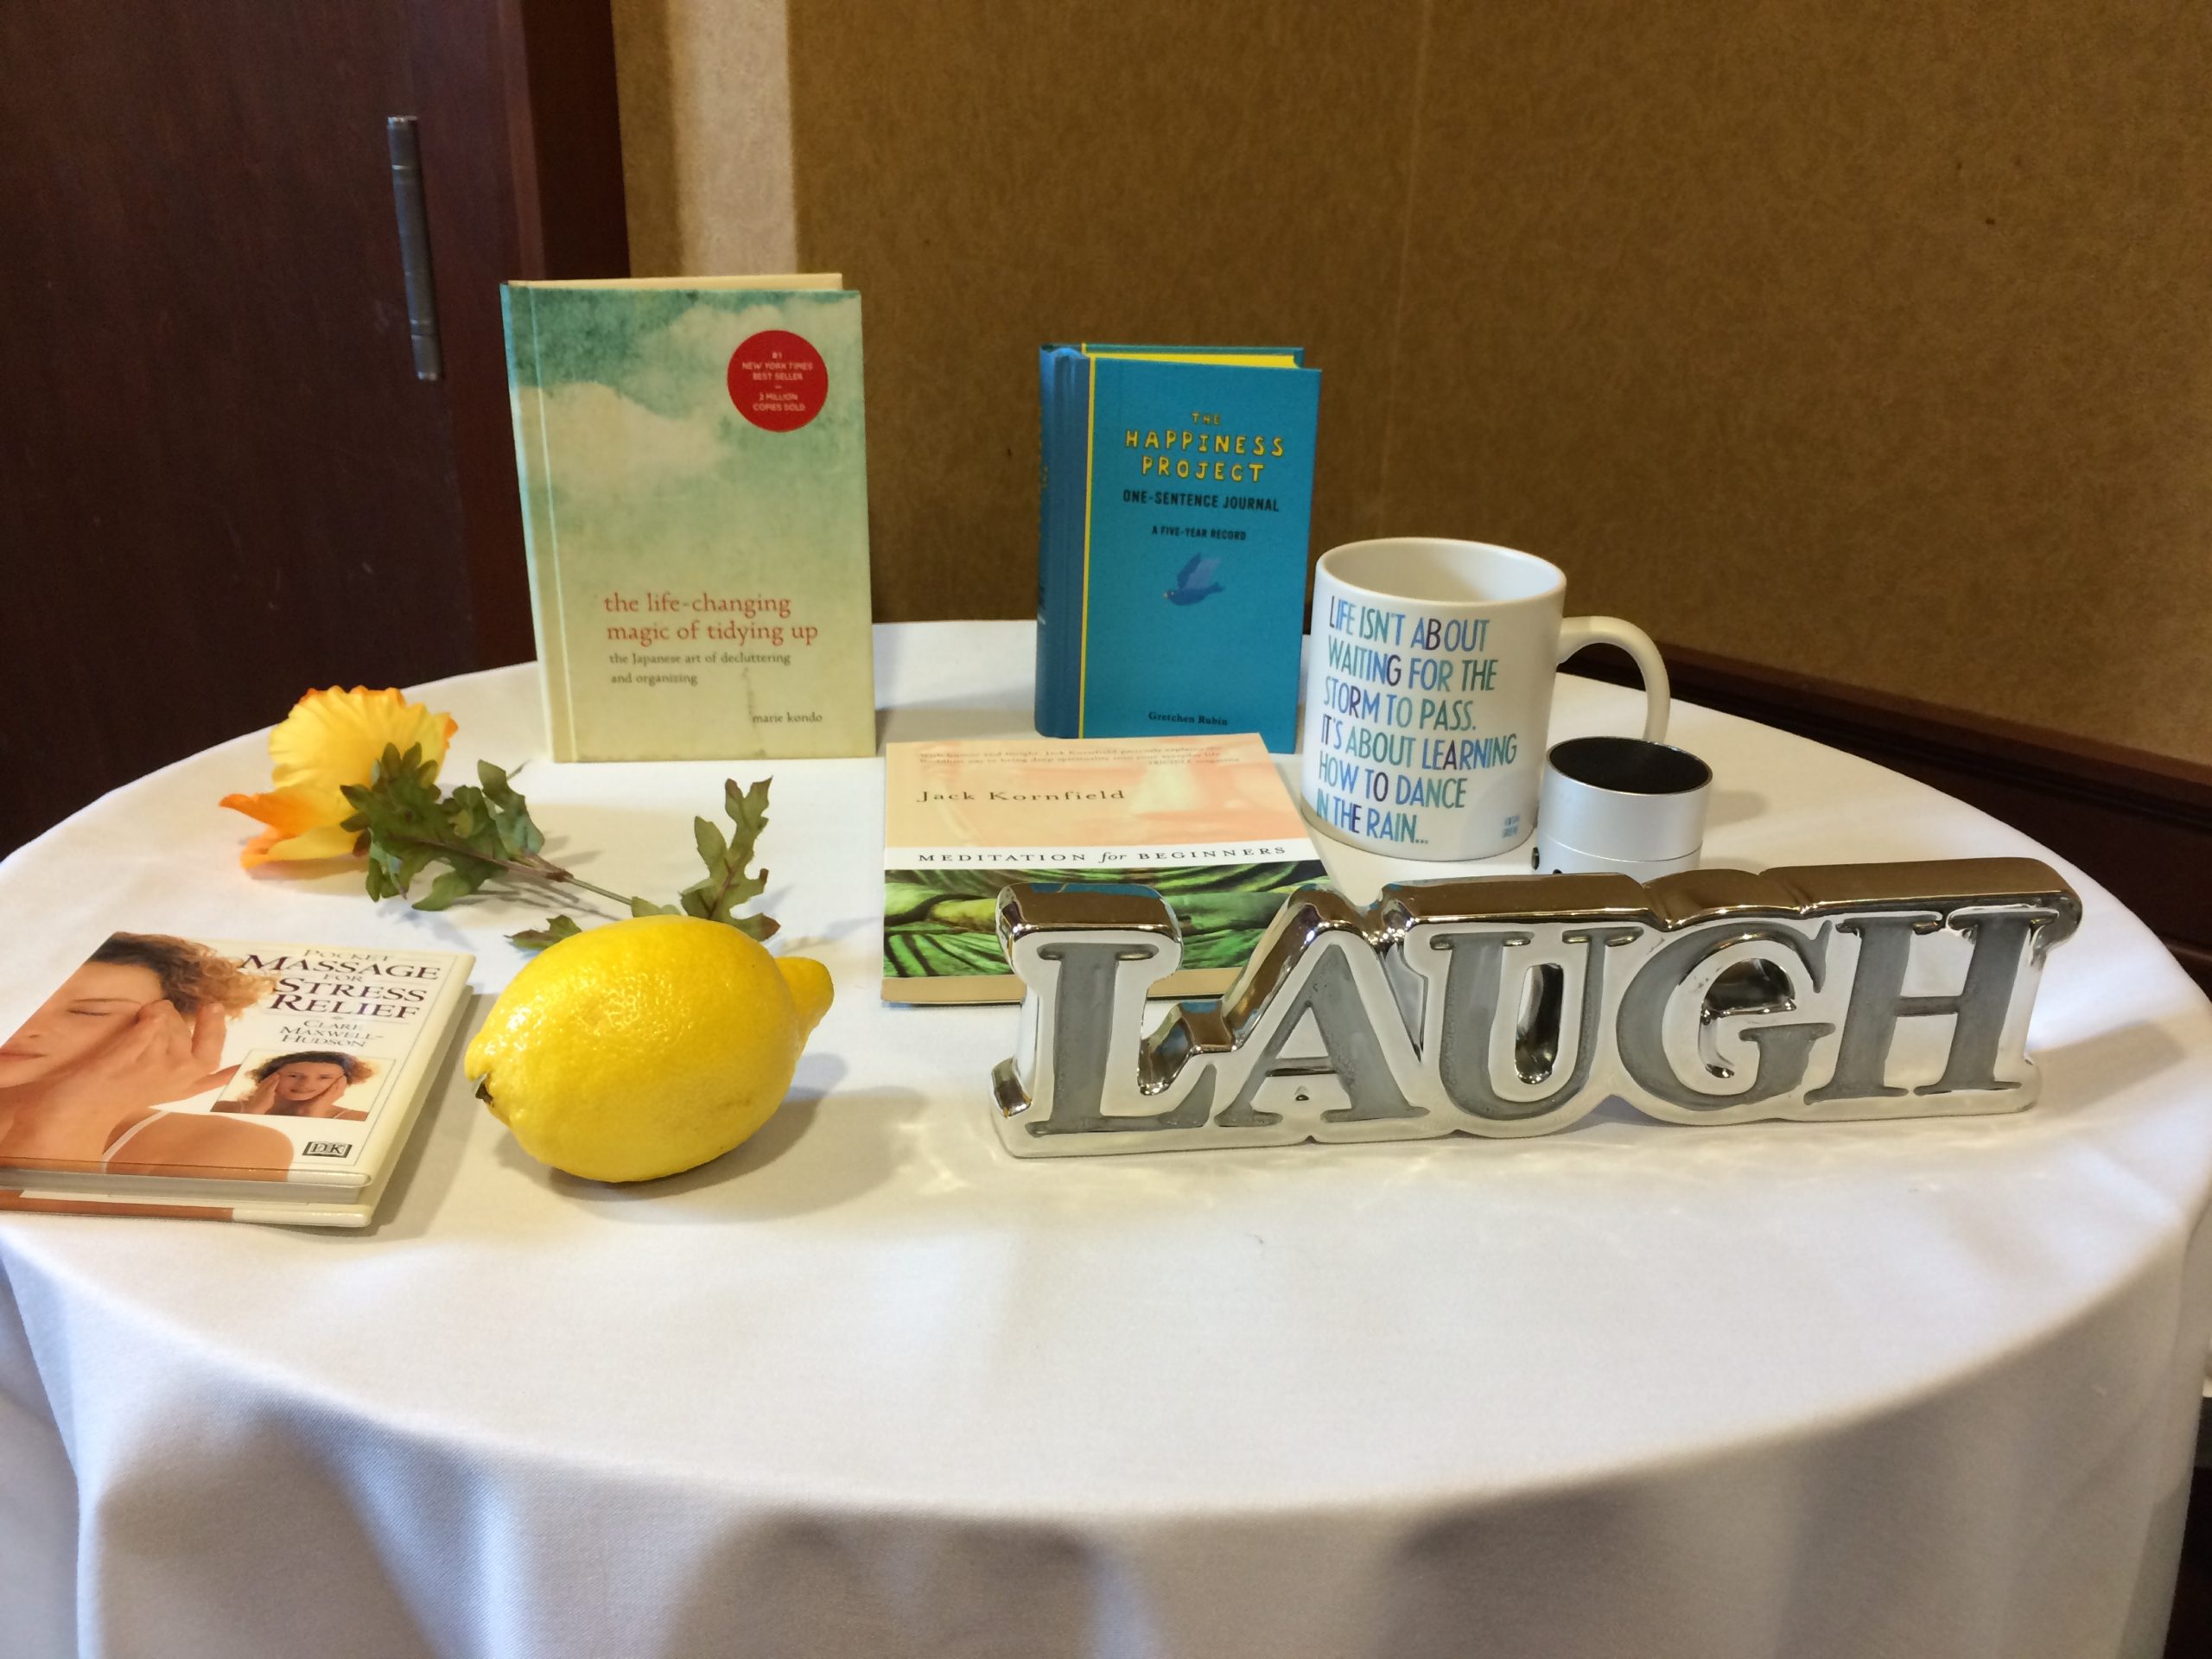 table display with books, flowers, a mug and a sign that says laugh